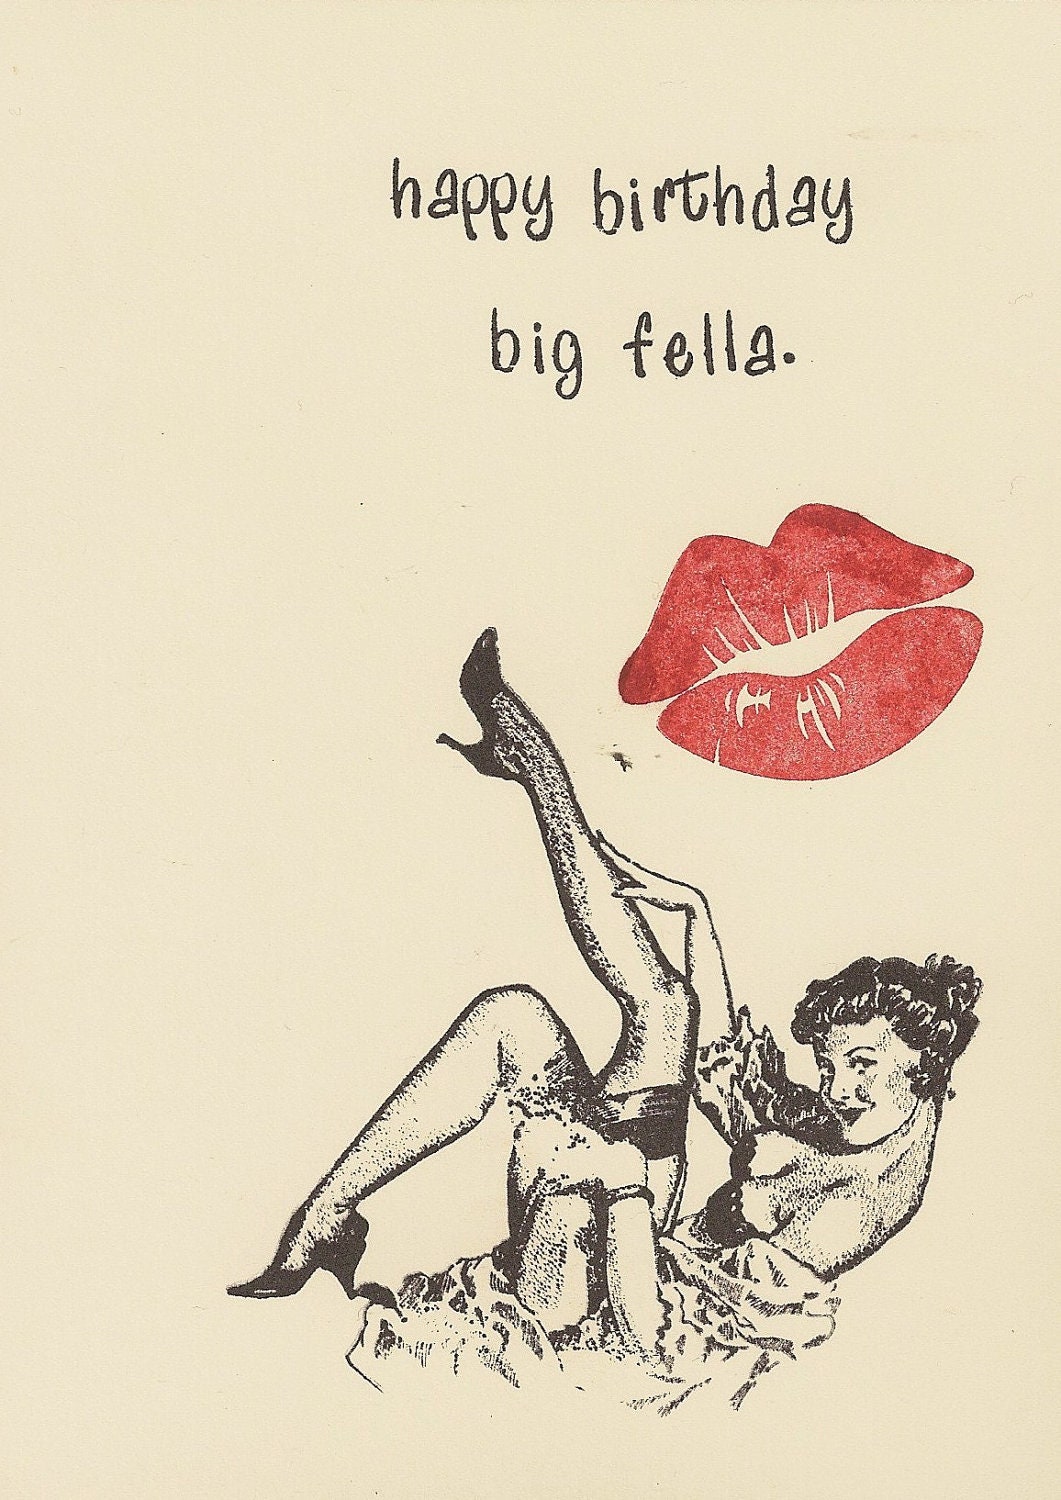 Sexy Pin Up Glamour Girl Handstamped Birthday Card For Him - awkwardmoment